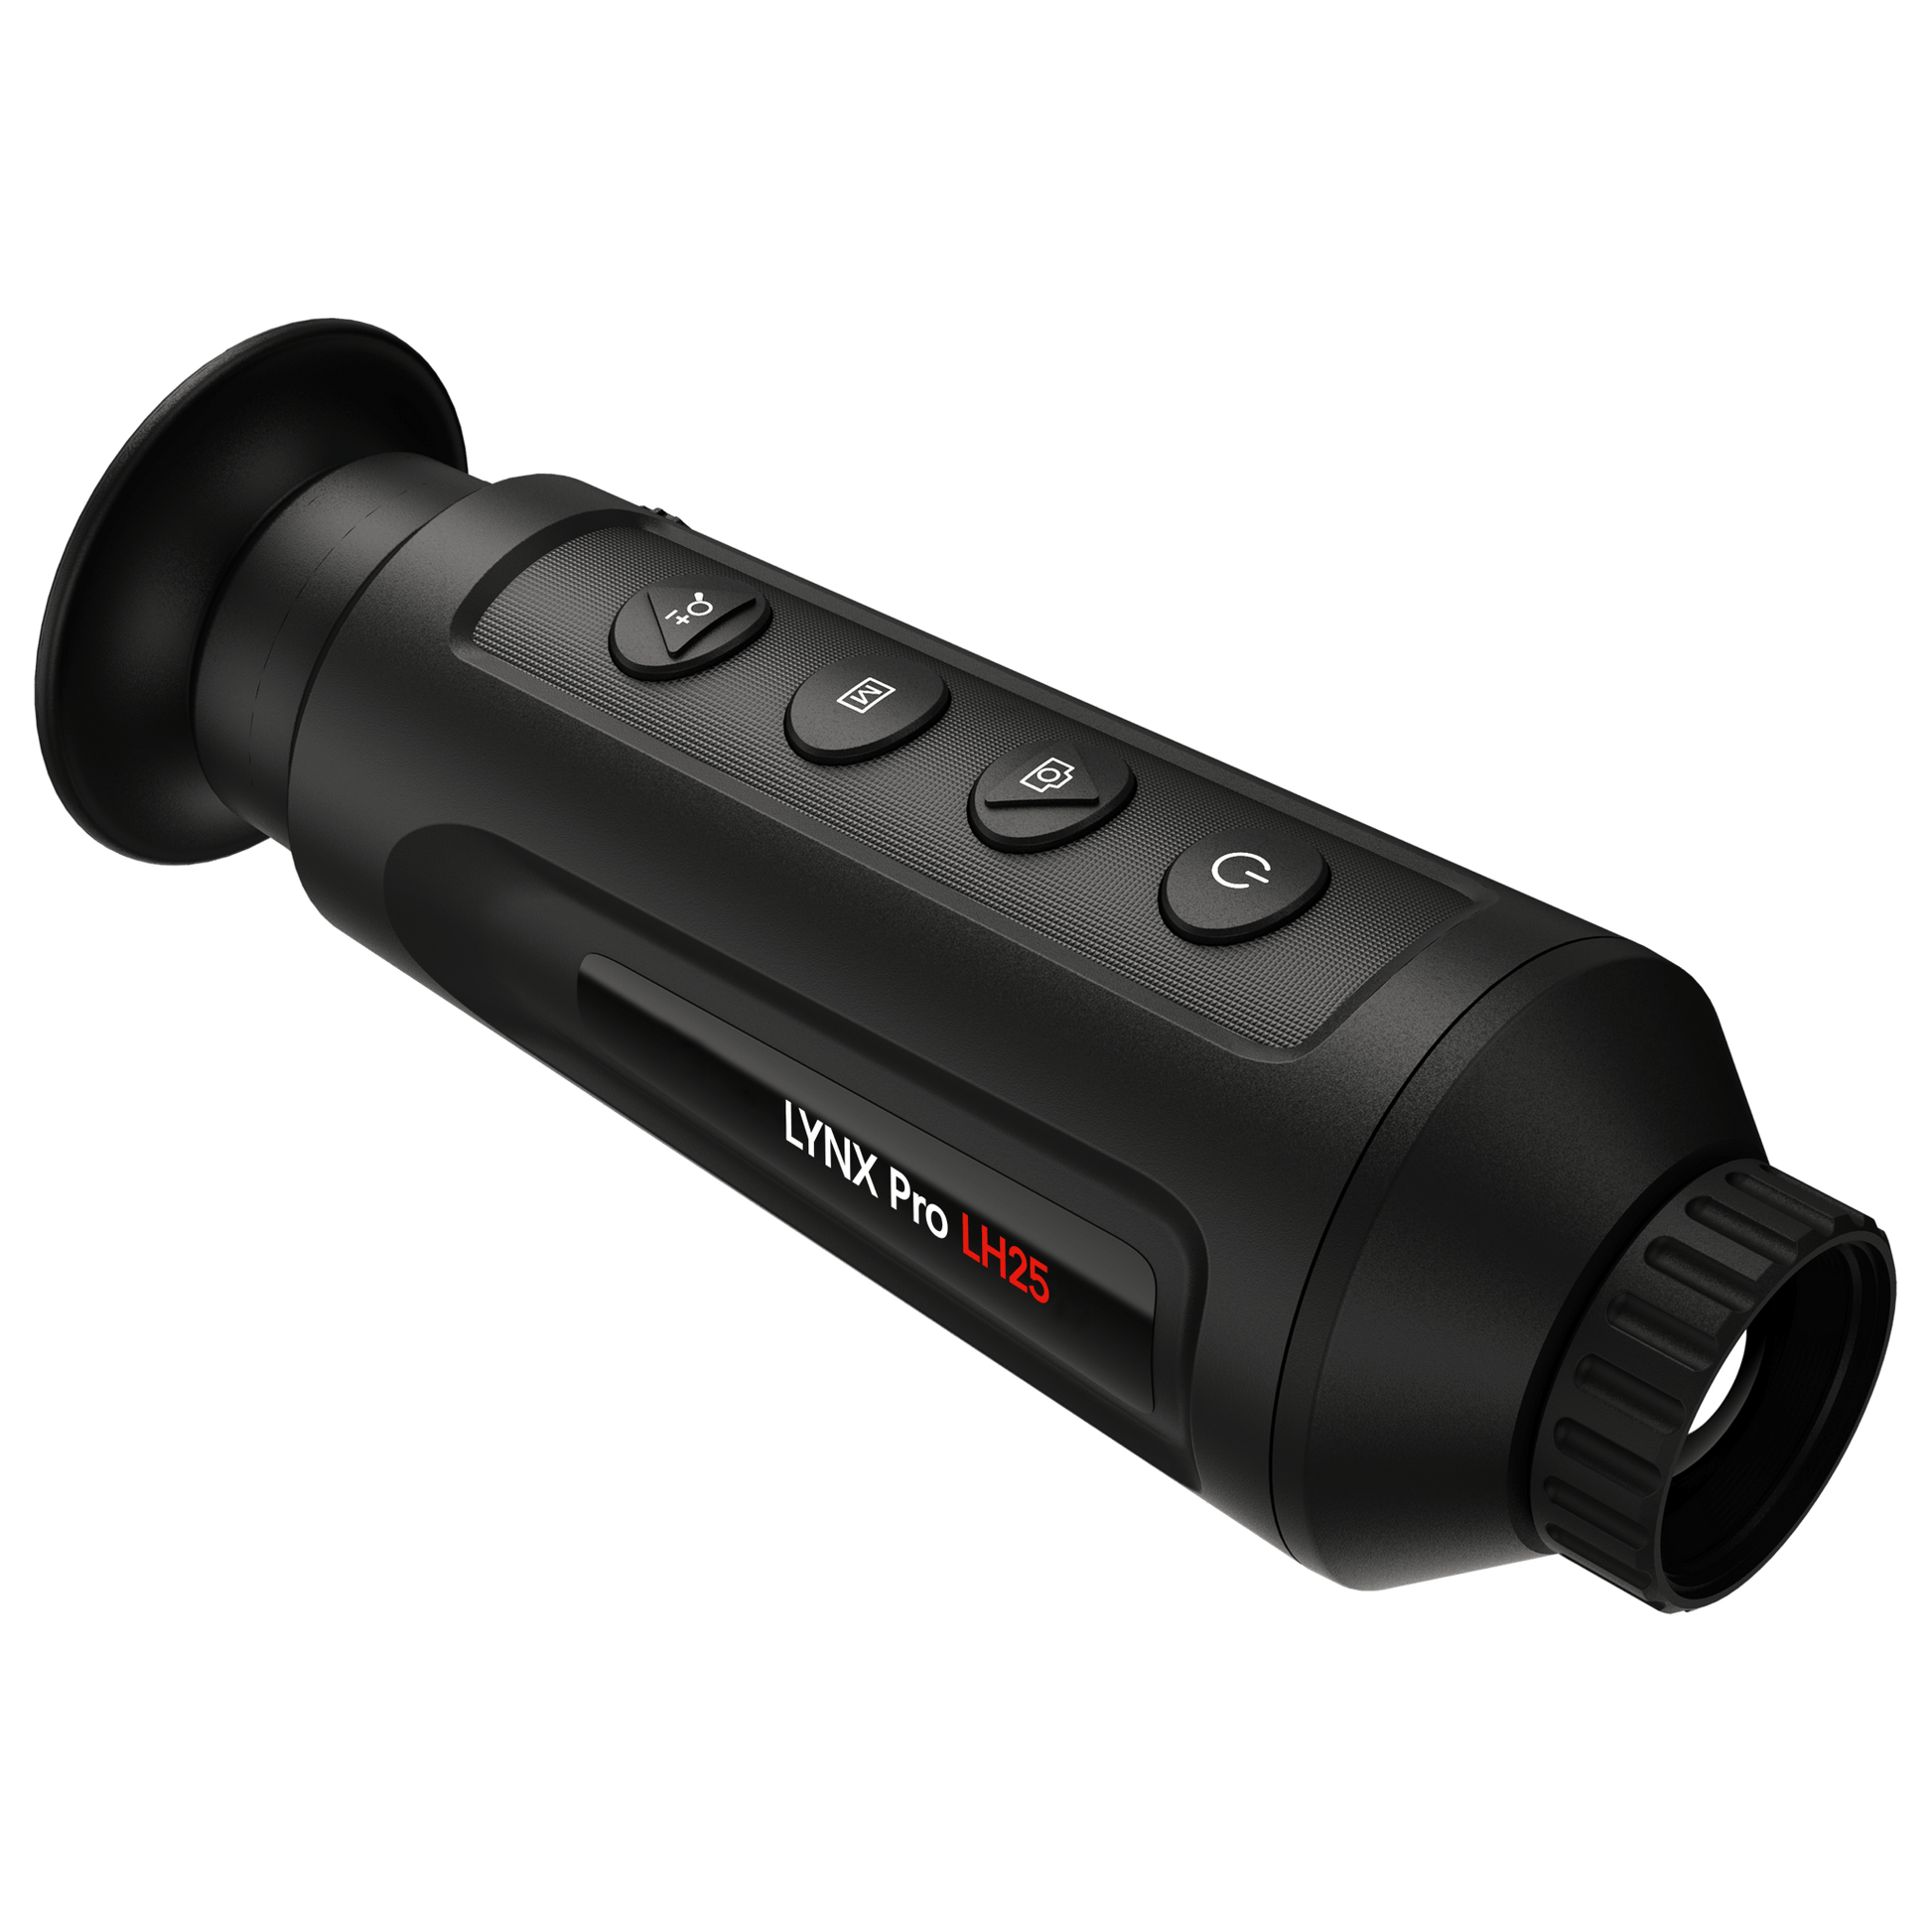 Cape Thermal - The best thermal imaging monoculars for sale - HikMicro LYNX Pro LH25 Handheld thermal imaging monocular - Right Side View